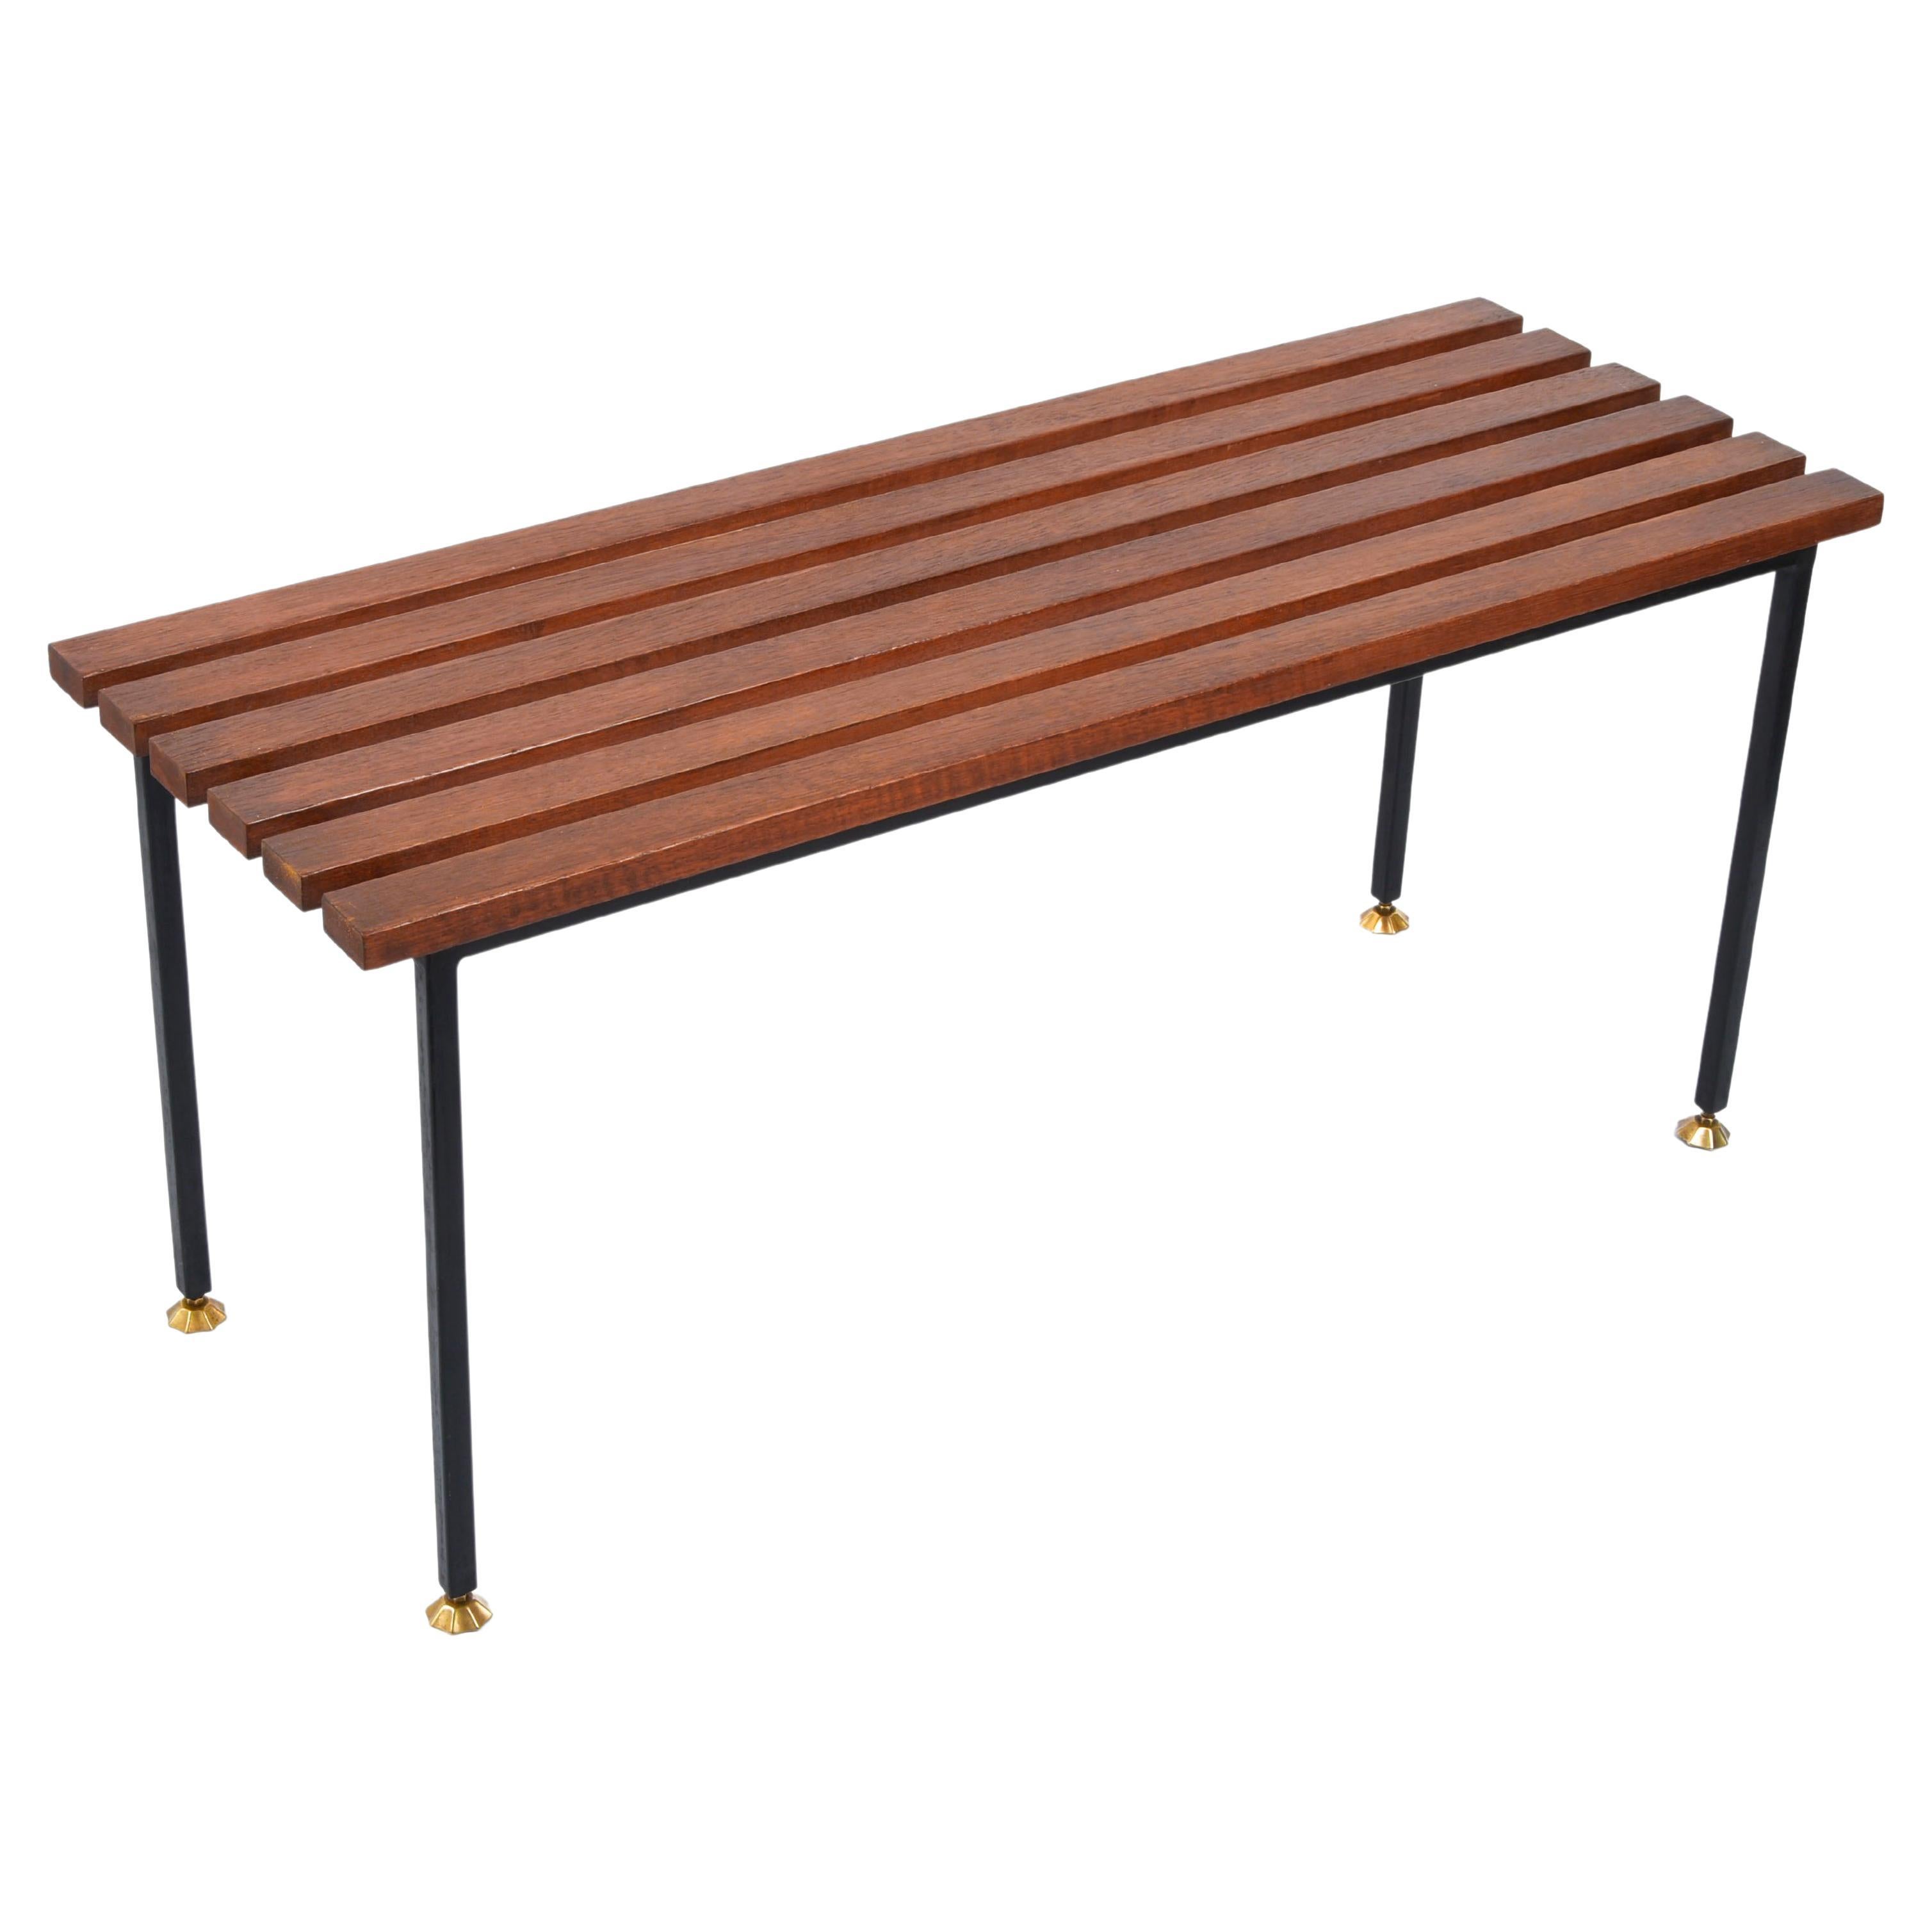 Midcentury Teak and Black Enameled Metal Italian Bench with Brass Feet, 1960s For Sale